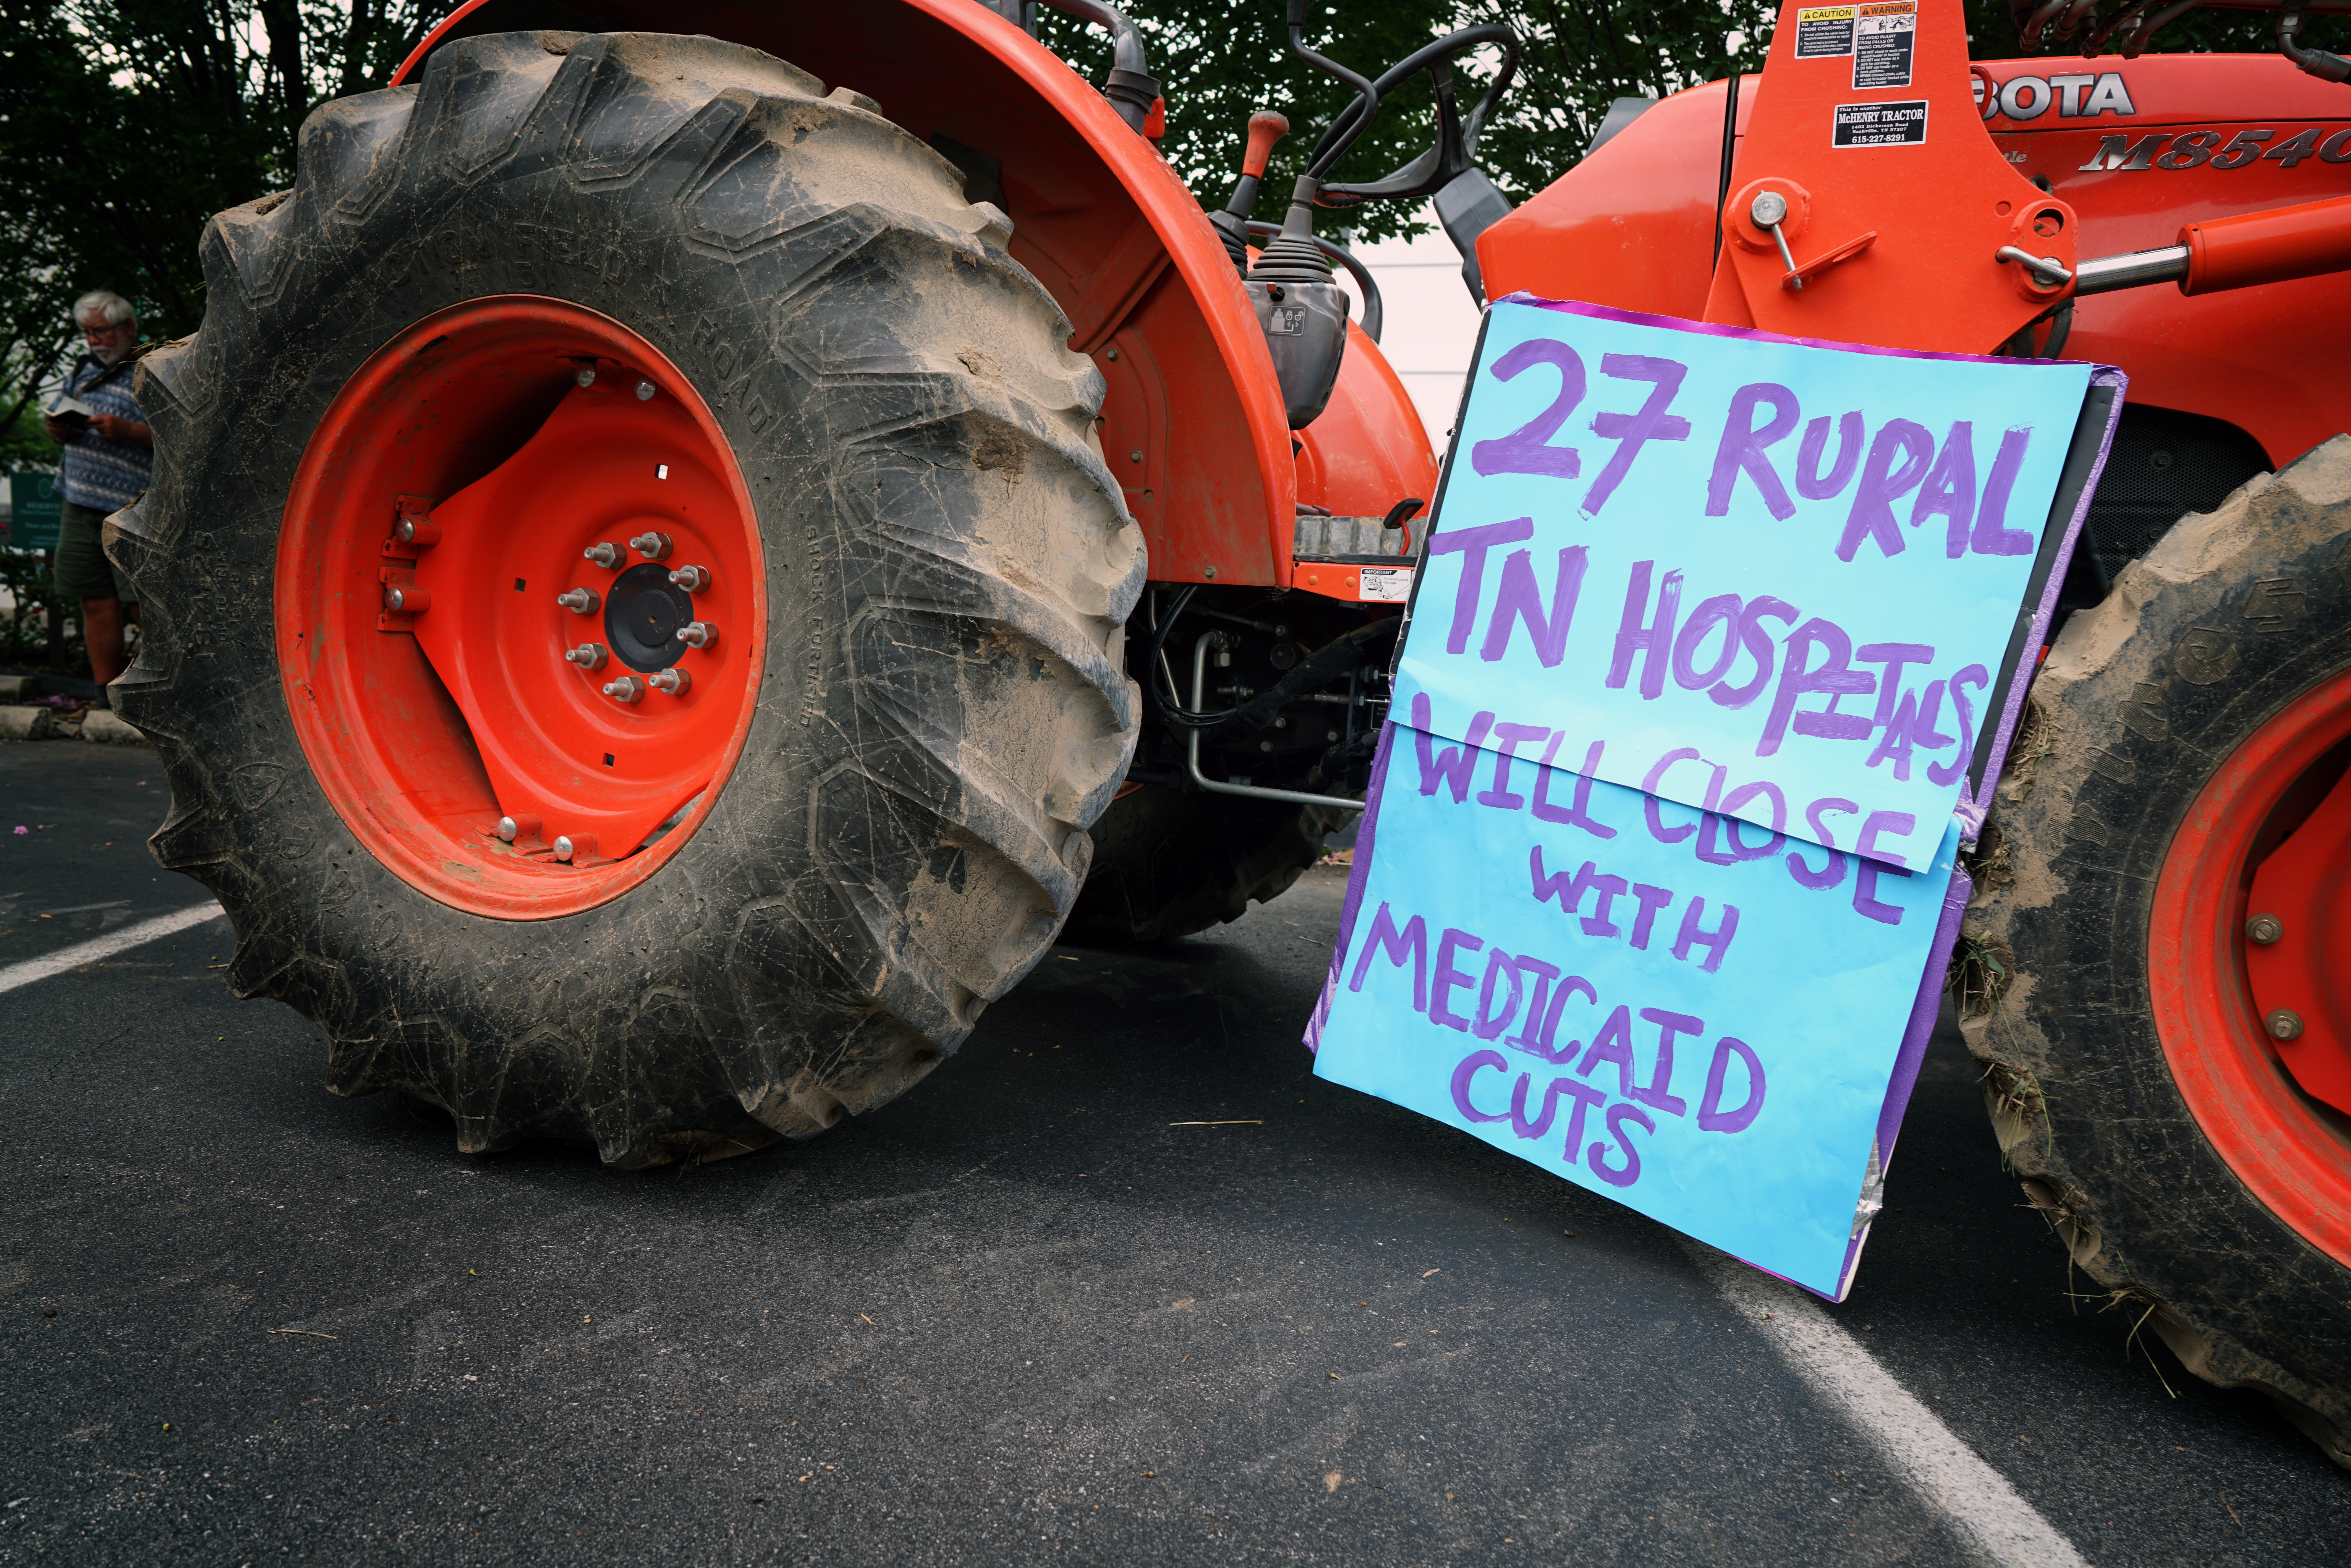 An orange tractor with a handmade poster leaning against it that says: "27 rural TN hospitals will close with Medicaid cuts"